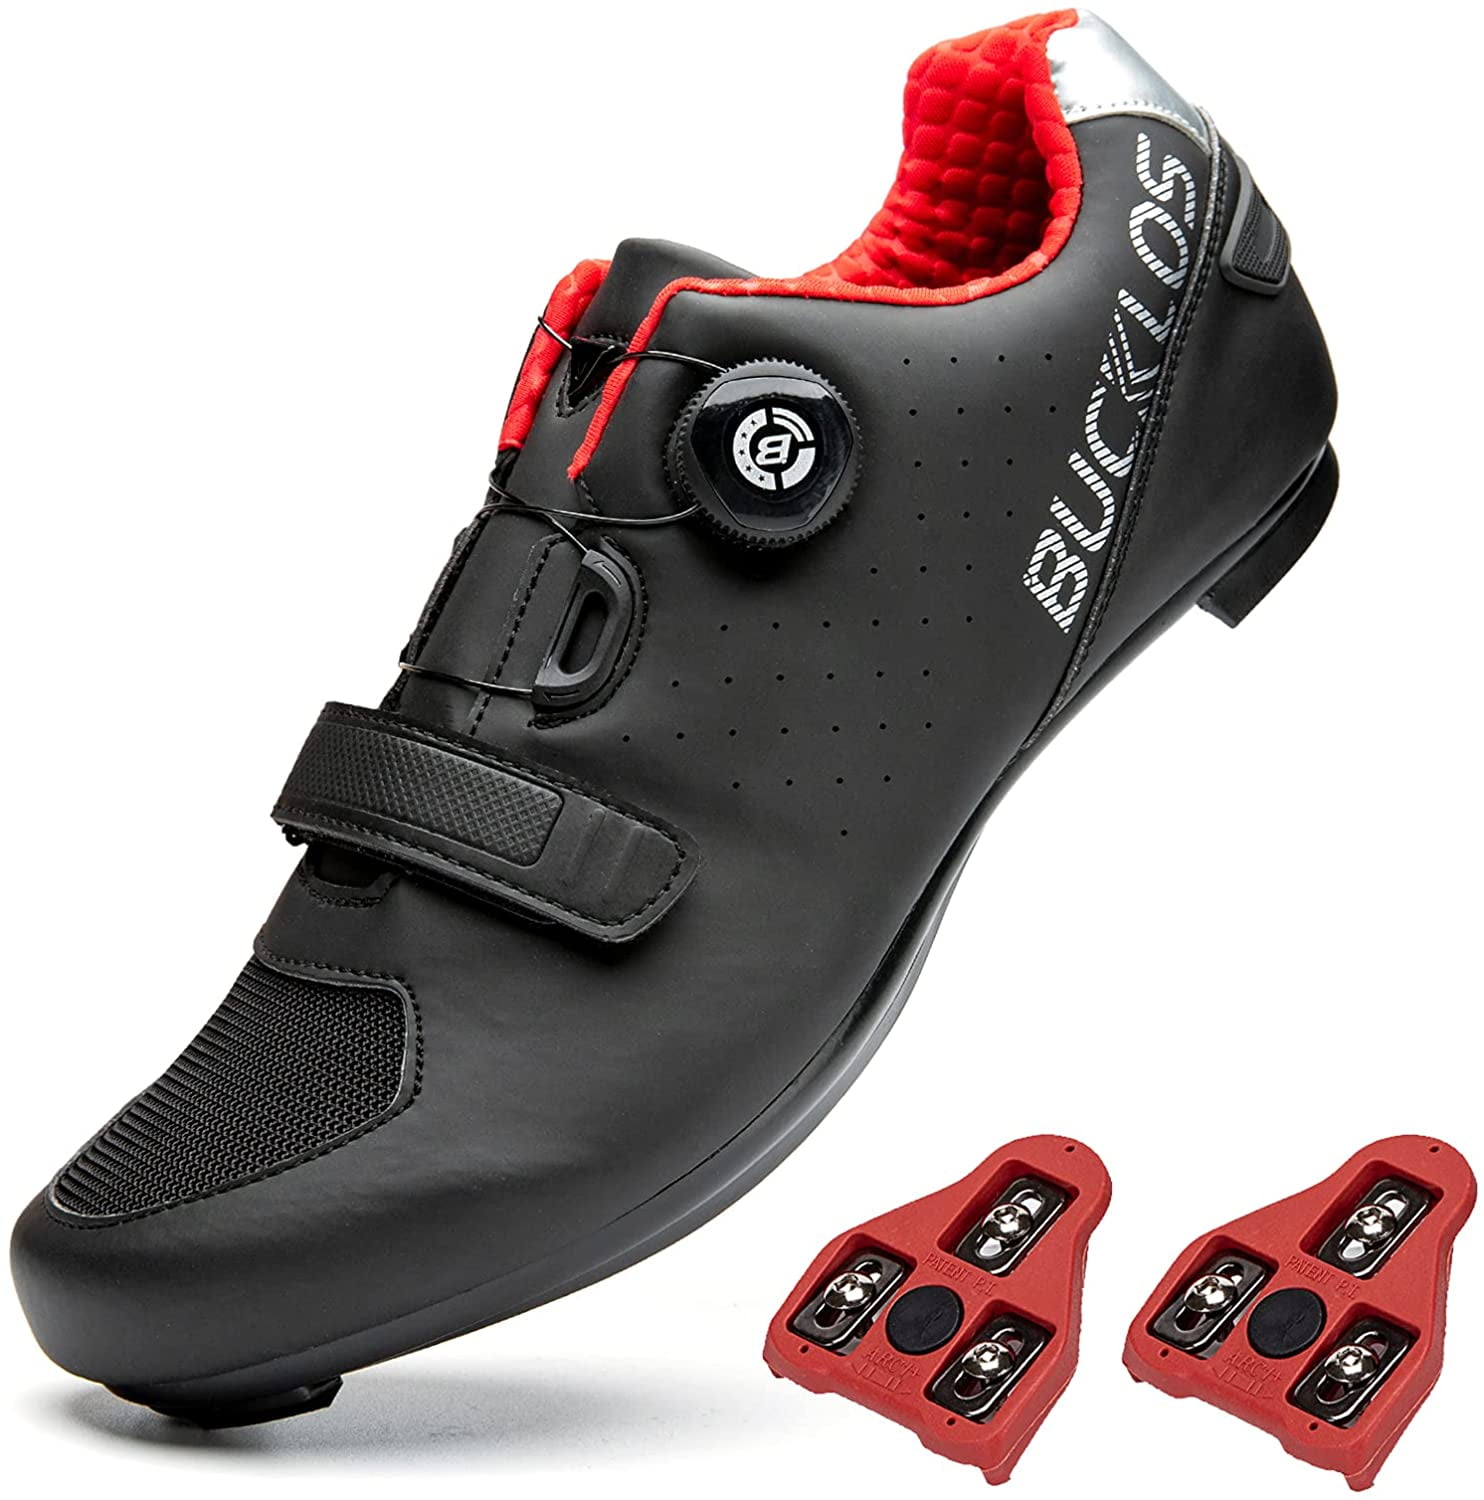 Men's Outdoor Cycling Shoes Breathable SPD Road Bike Shoes Mtb Bicycle Sneakers 